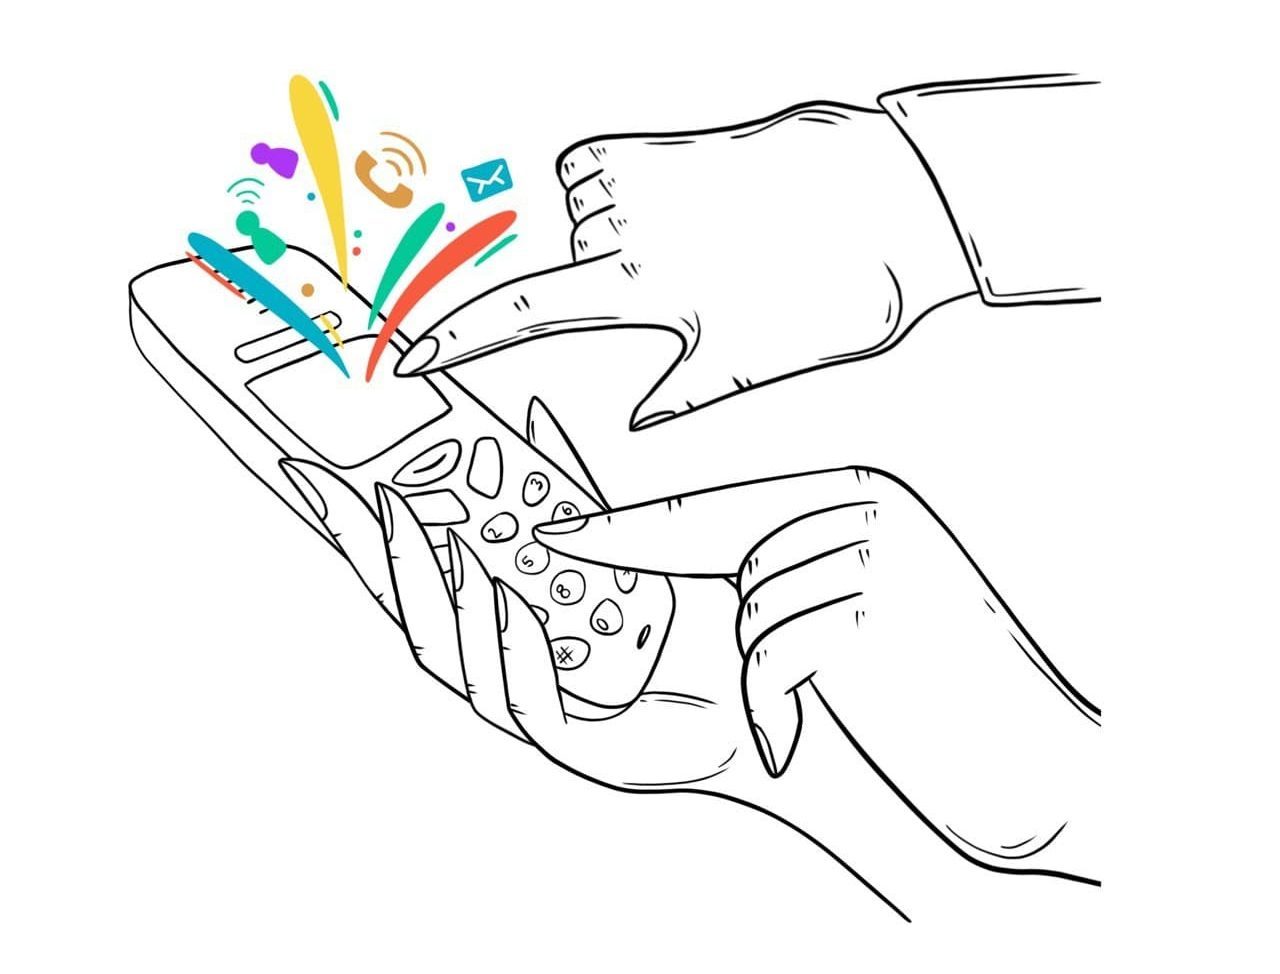 Drawing shows one hand holding a mobile phone, with another person's hand reaching into the picture to point something out on the screen